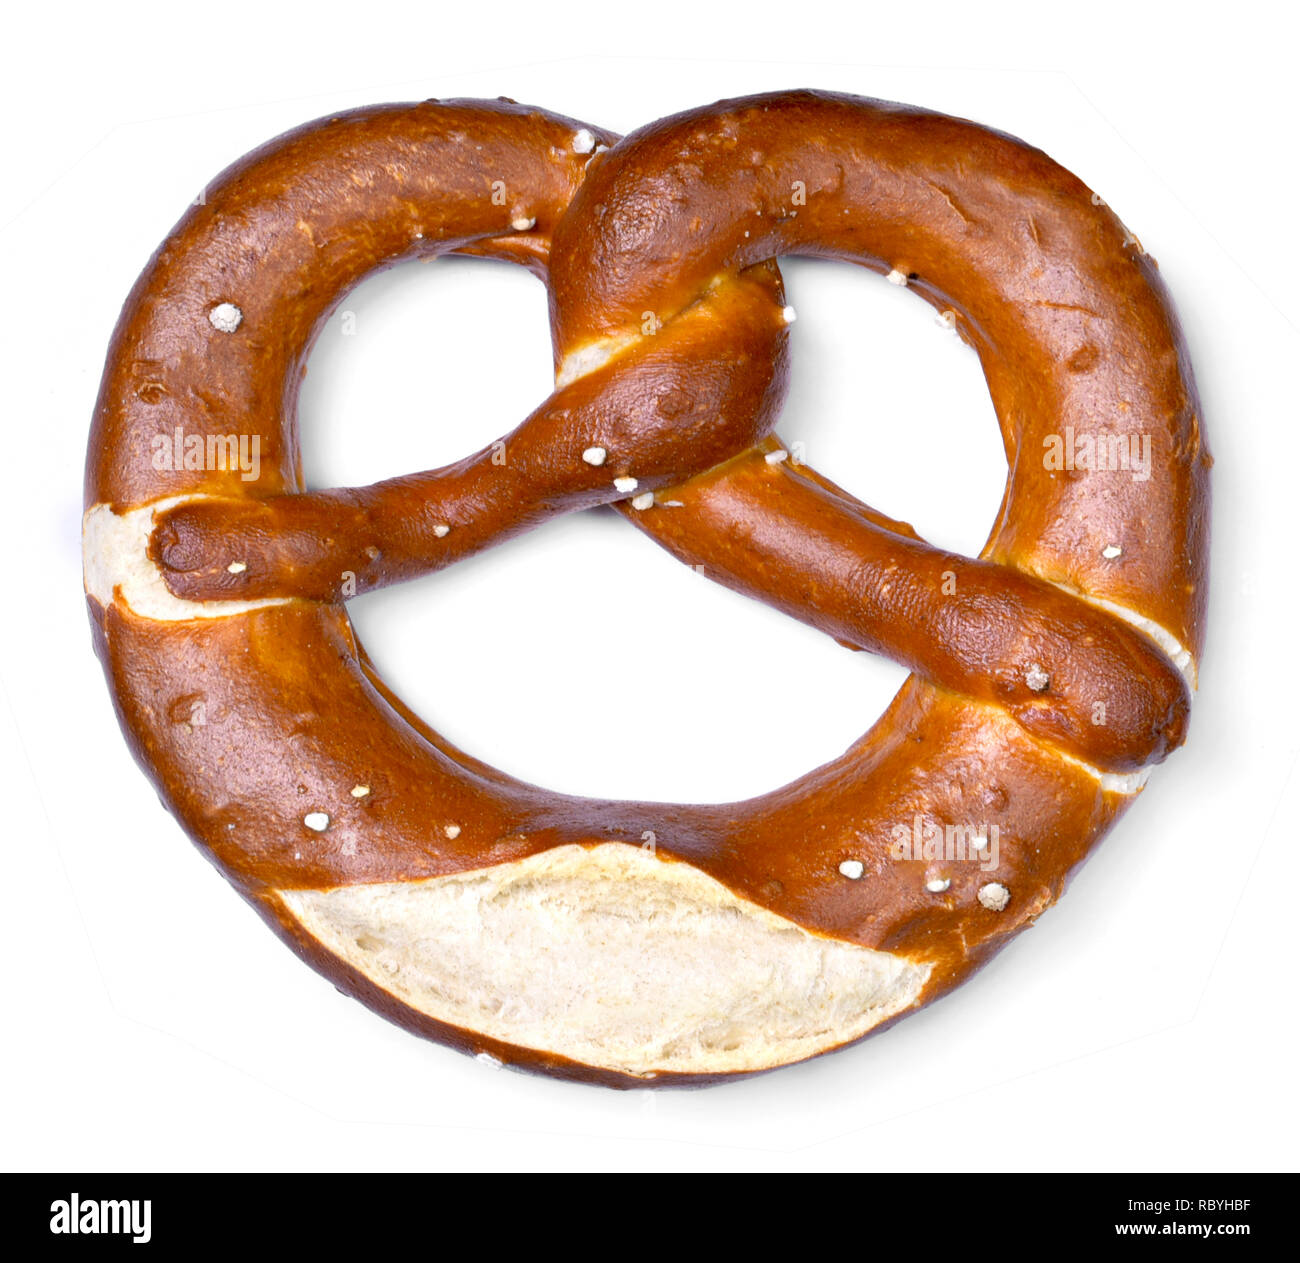 Delicious pretzel with salt, german food. Pretzel, traditional bavarian food, isolated on white background. Stock Photo